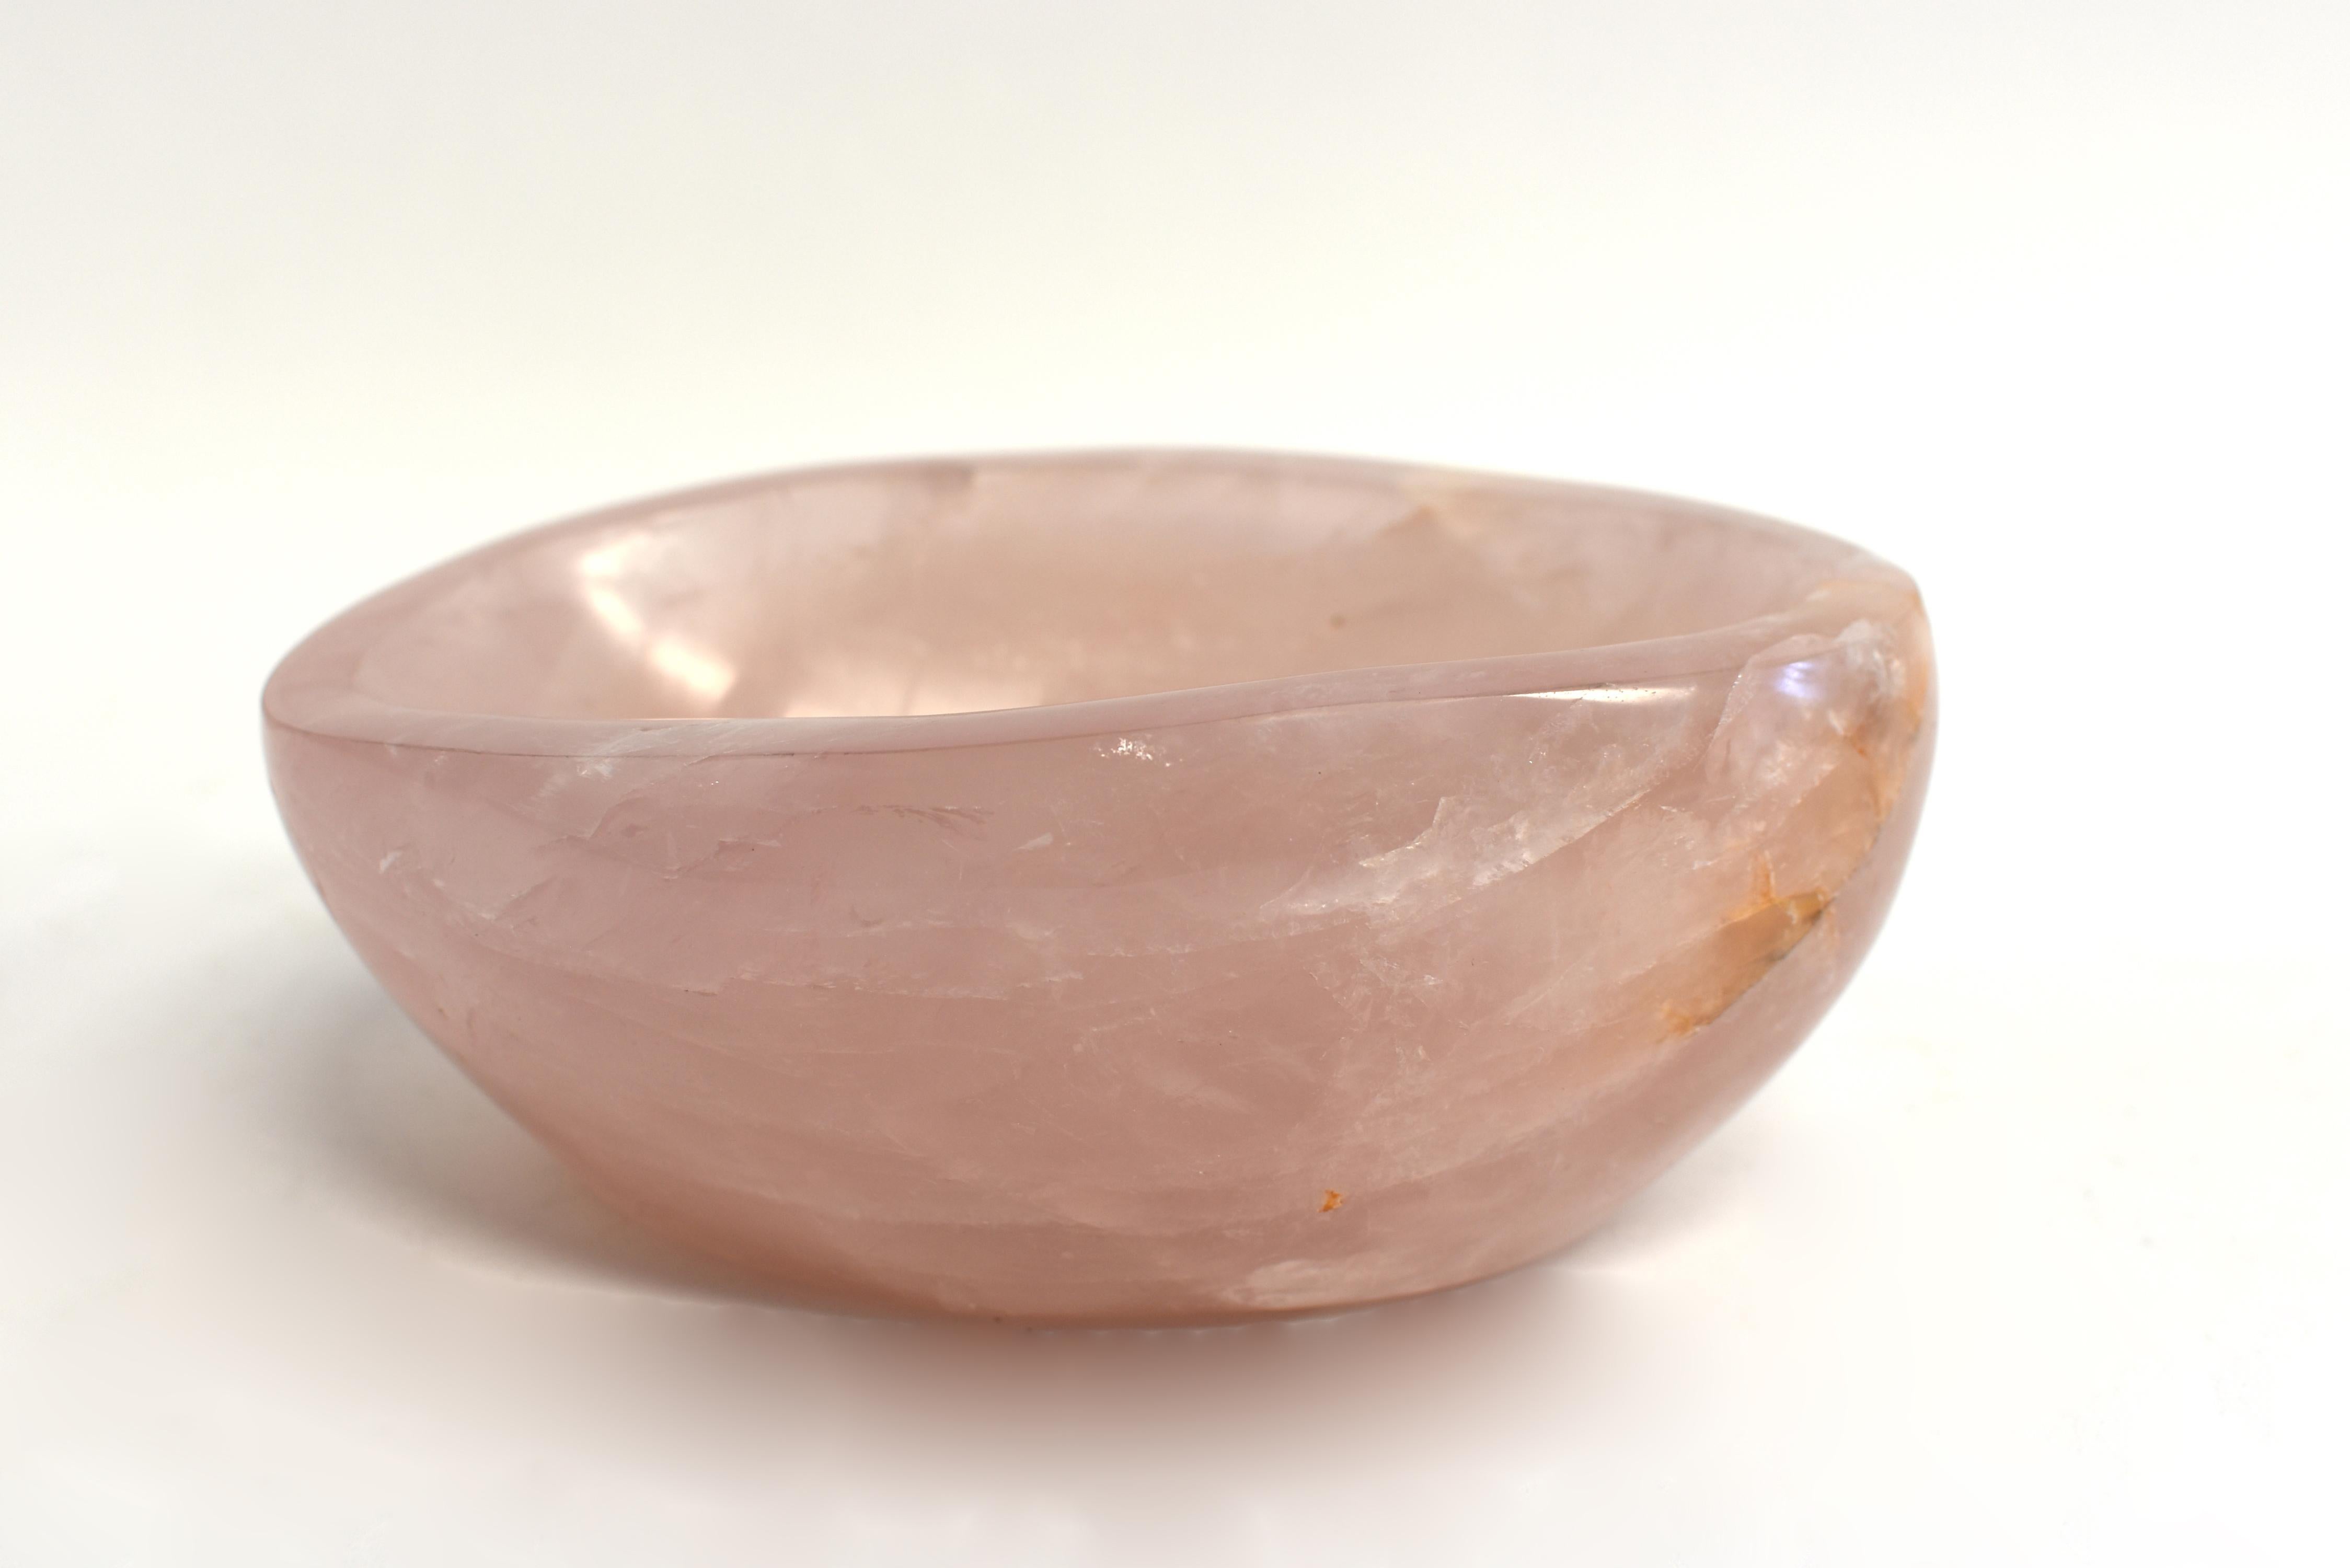 Oval Rose Quartz Bowl 6 Lb In Good Condition For Sale In Somis, CA